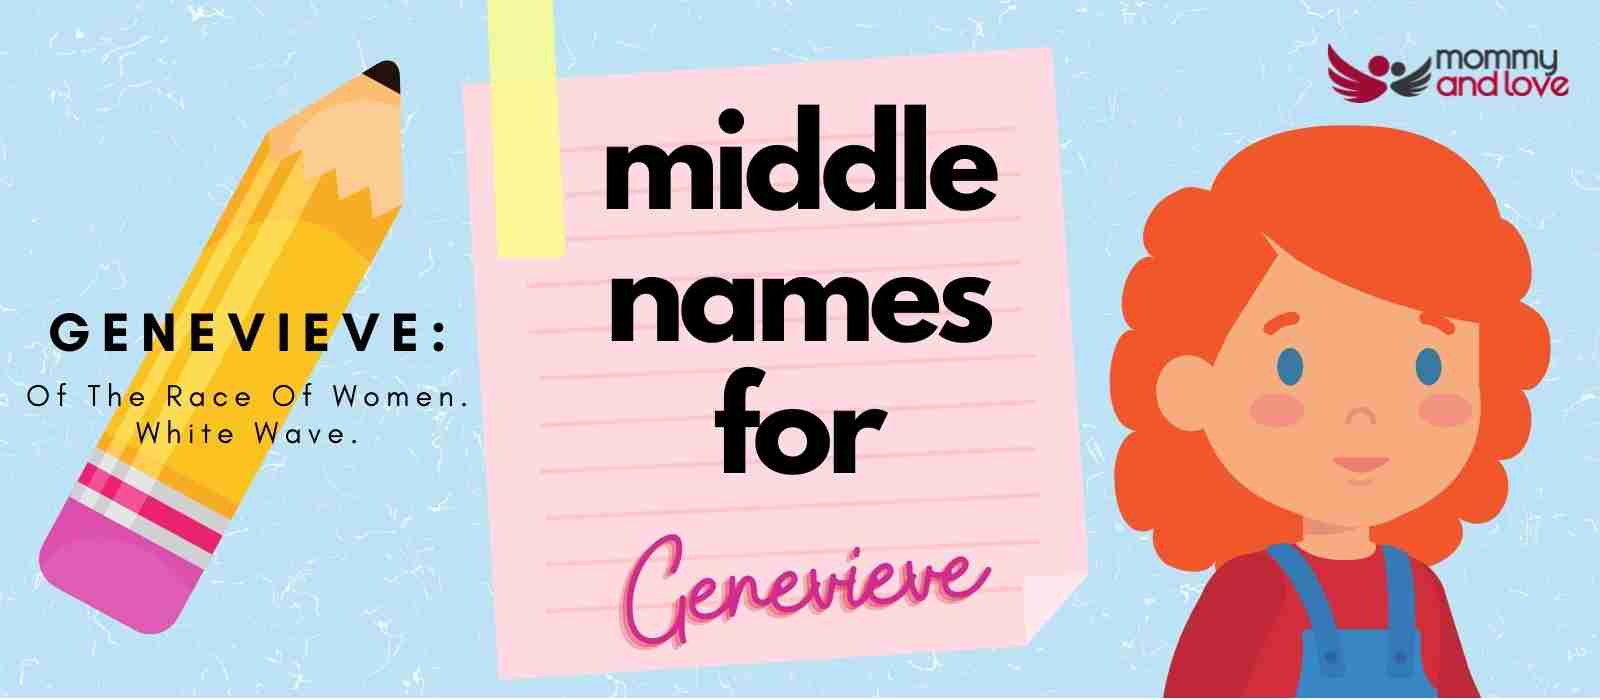 Middle Names for Genevieve